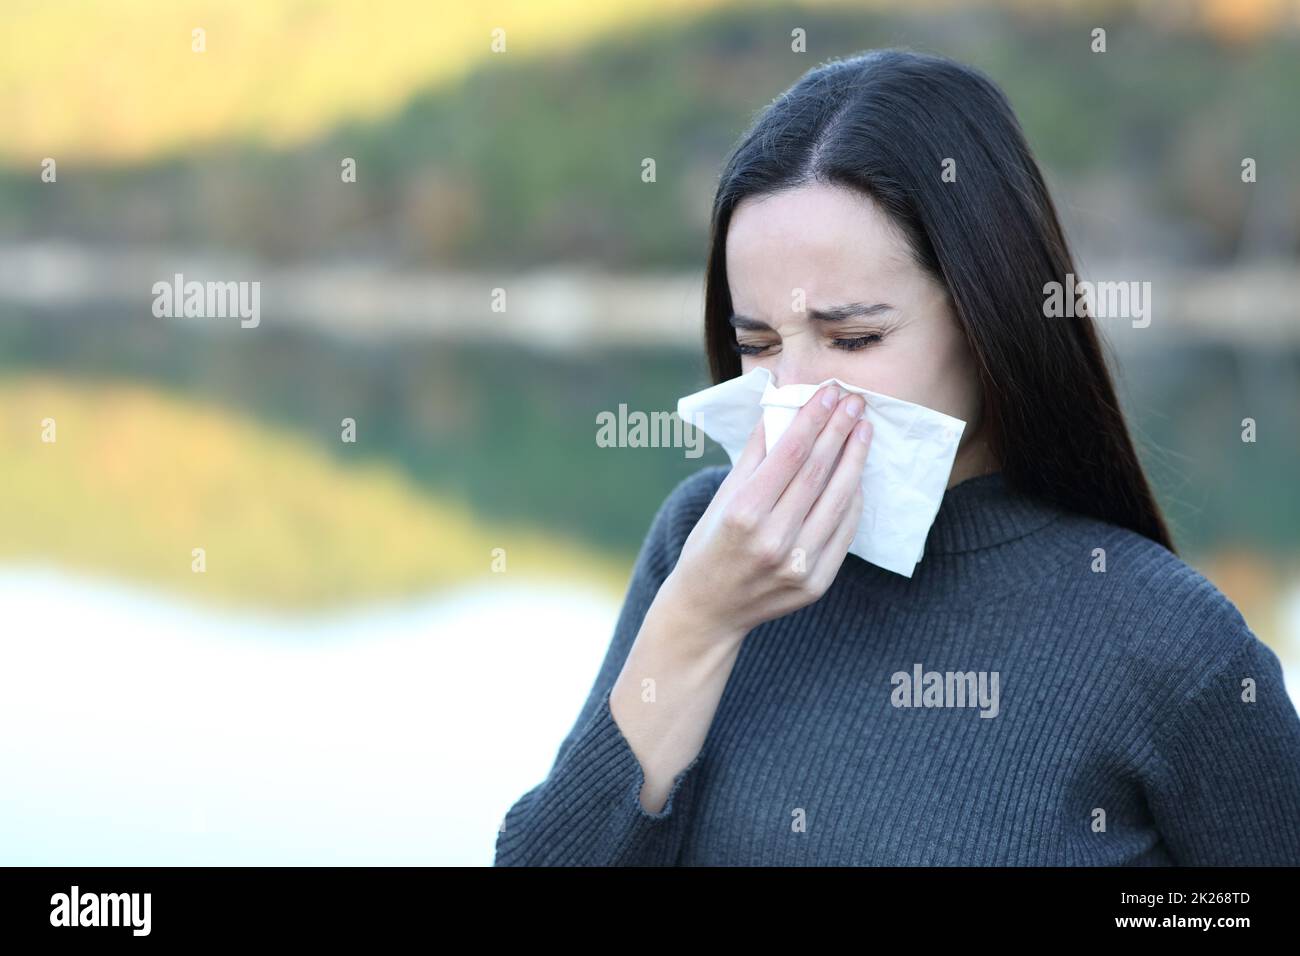 Ill woman blowing with a tissue outdoors Stock Photo